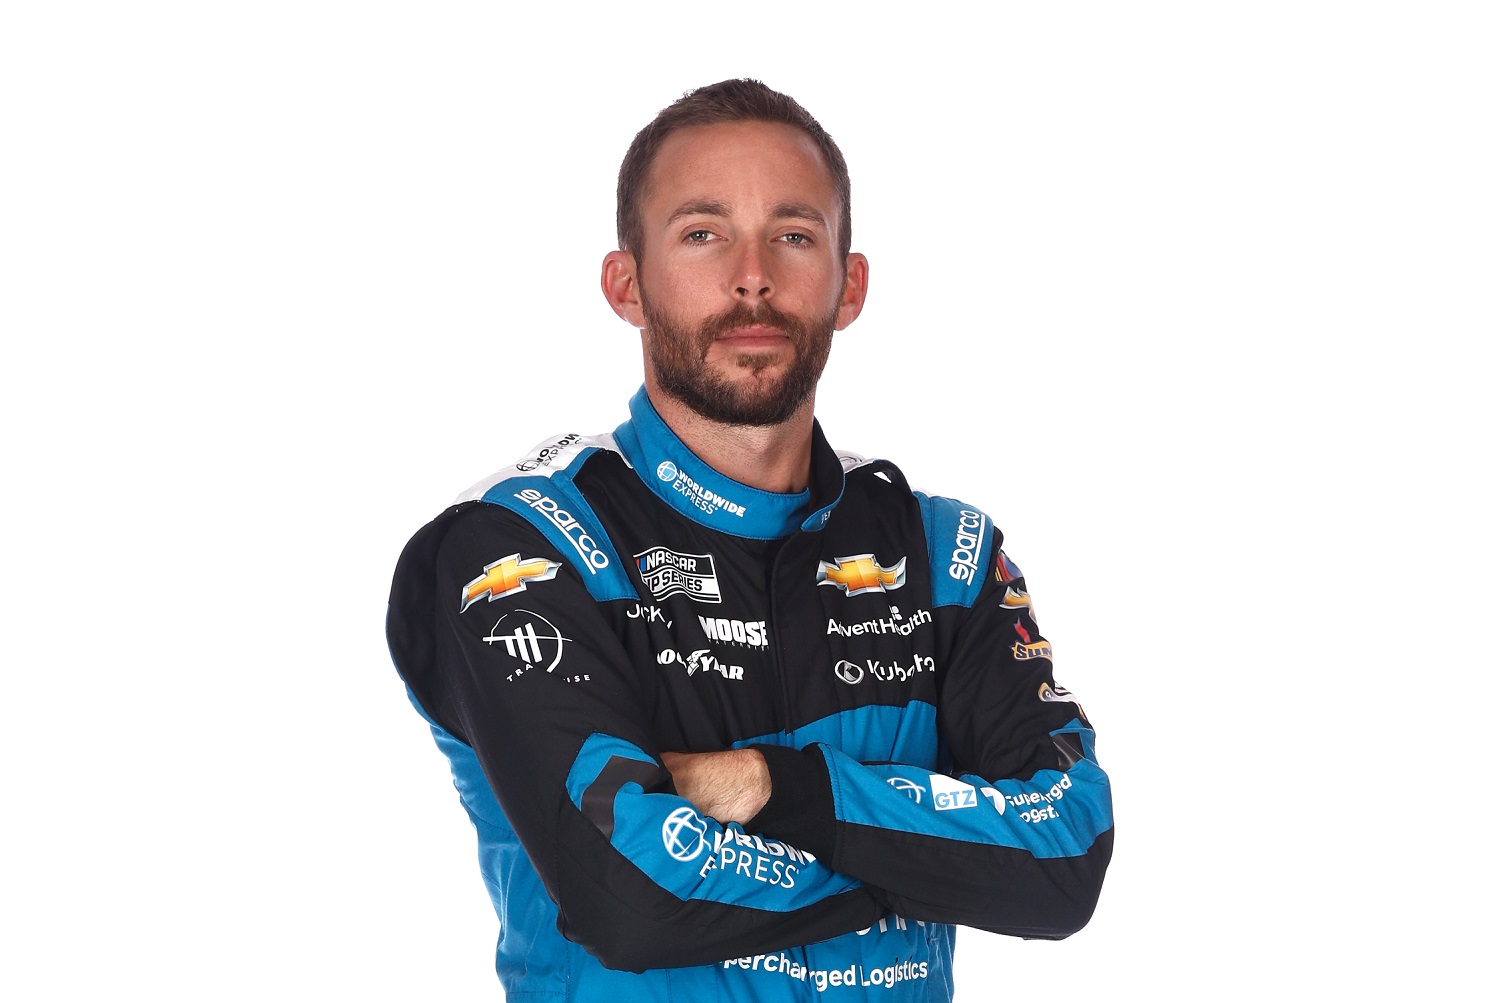 Here’s Compelling Evidence Ross Chastain’s Contract Extension Is on the Way